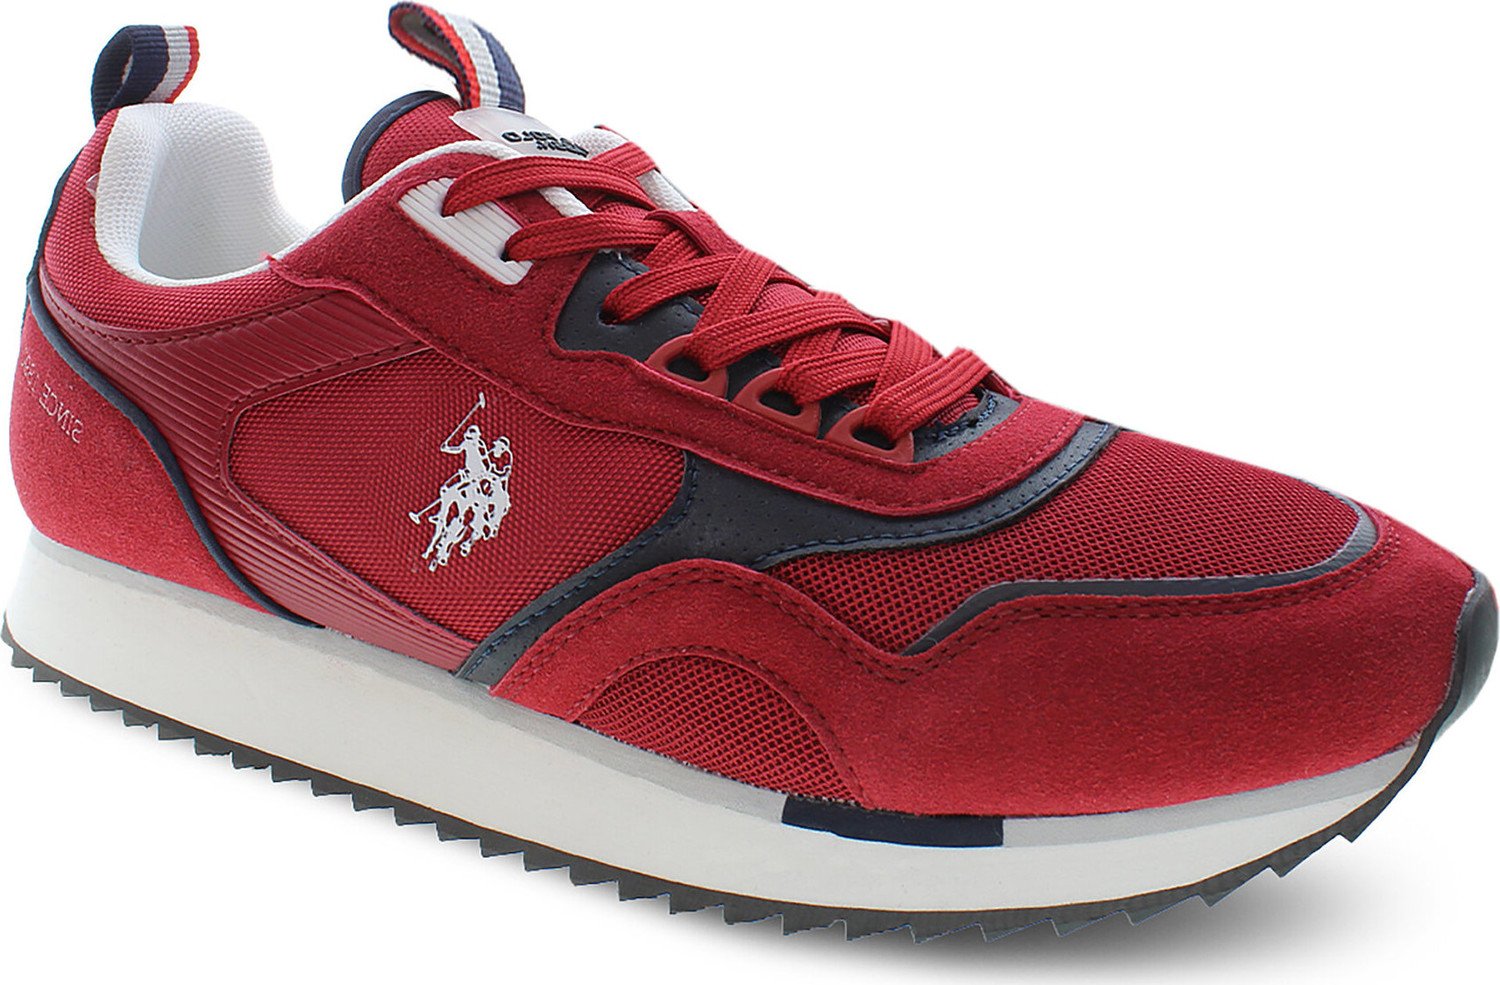 Sneakersy U.S. Polo Assn. Ethan ETHAN001 RED